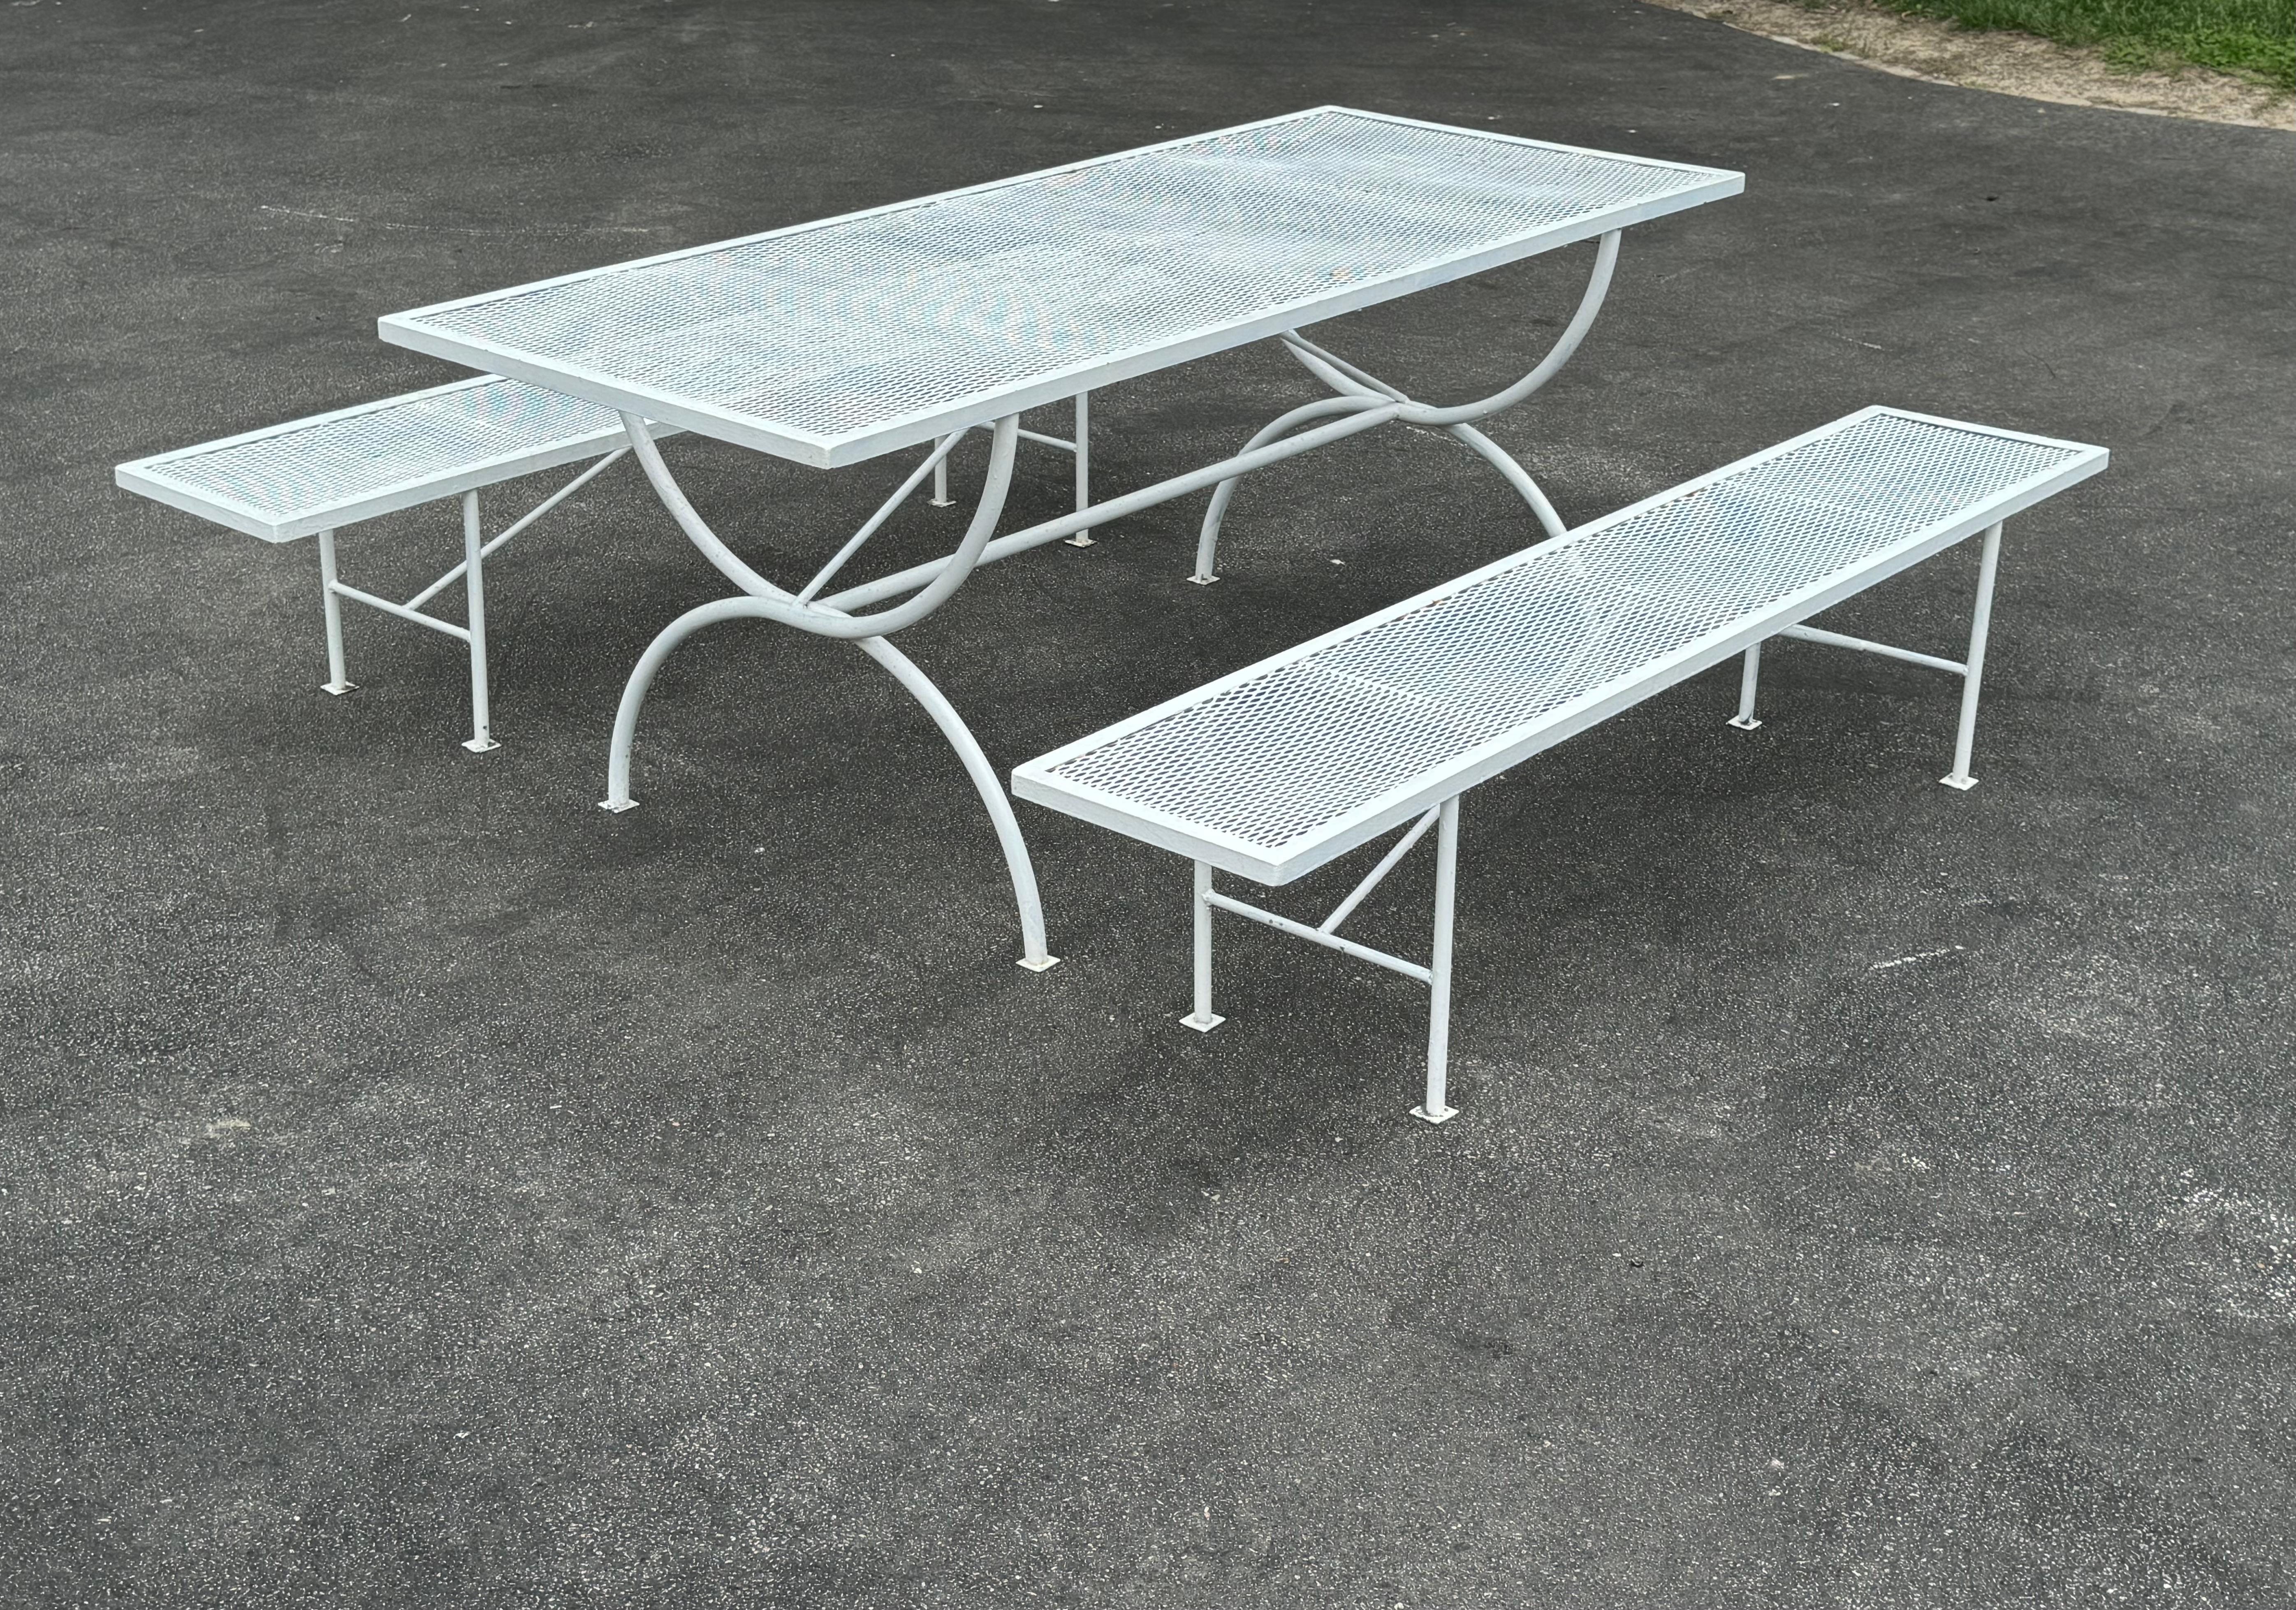 Uncommon 1960s Mid-Century Modern white painted Salterini era, wrought iron & mesh patio or garden dining set in the style of a picnic table with two benches. Versatile dining set, can also be used with regular patio chairs and use the benches